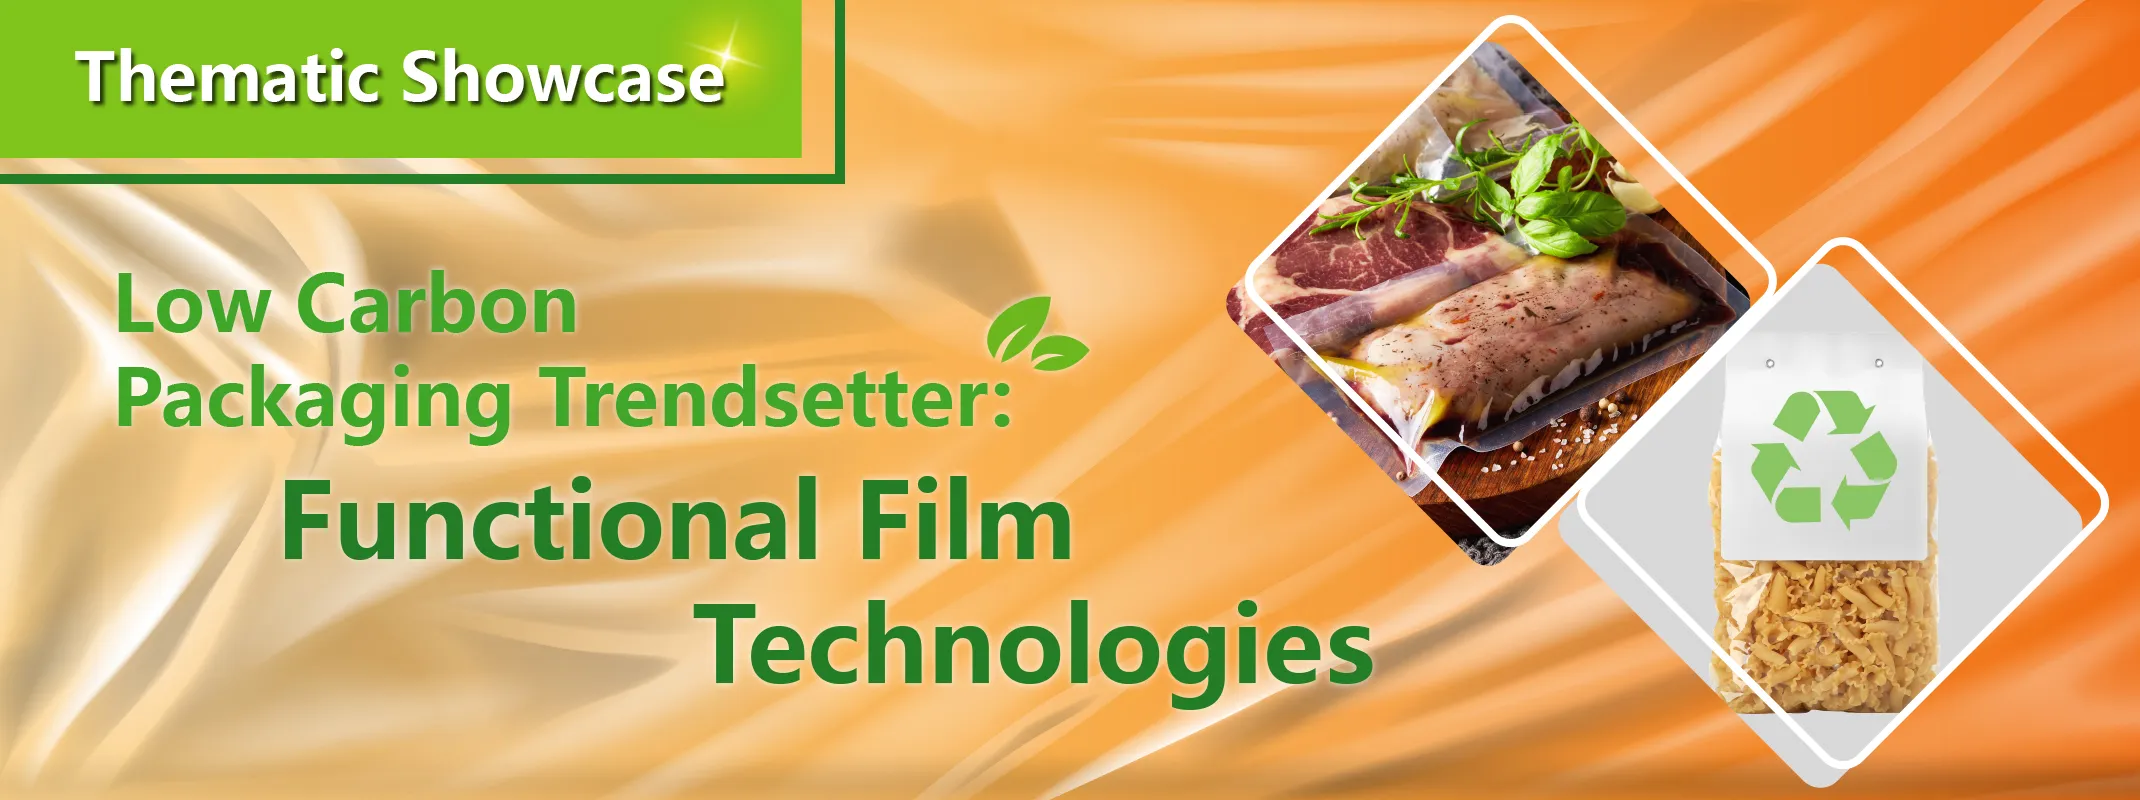 Low Carbon Packaging Trendsetter: Functional Film Technologies